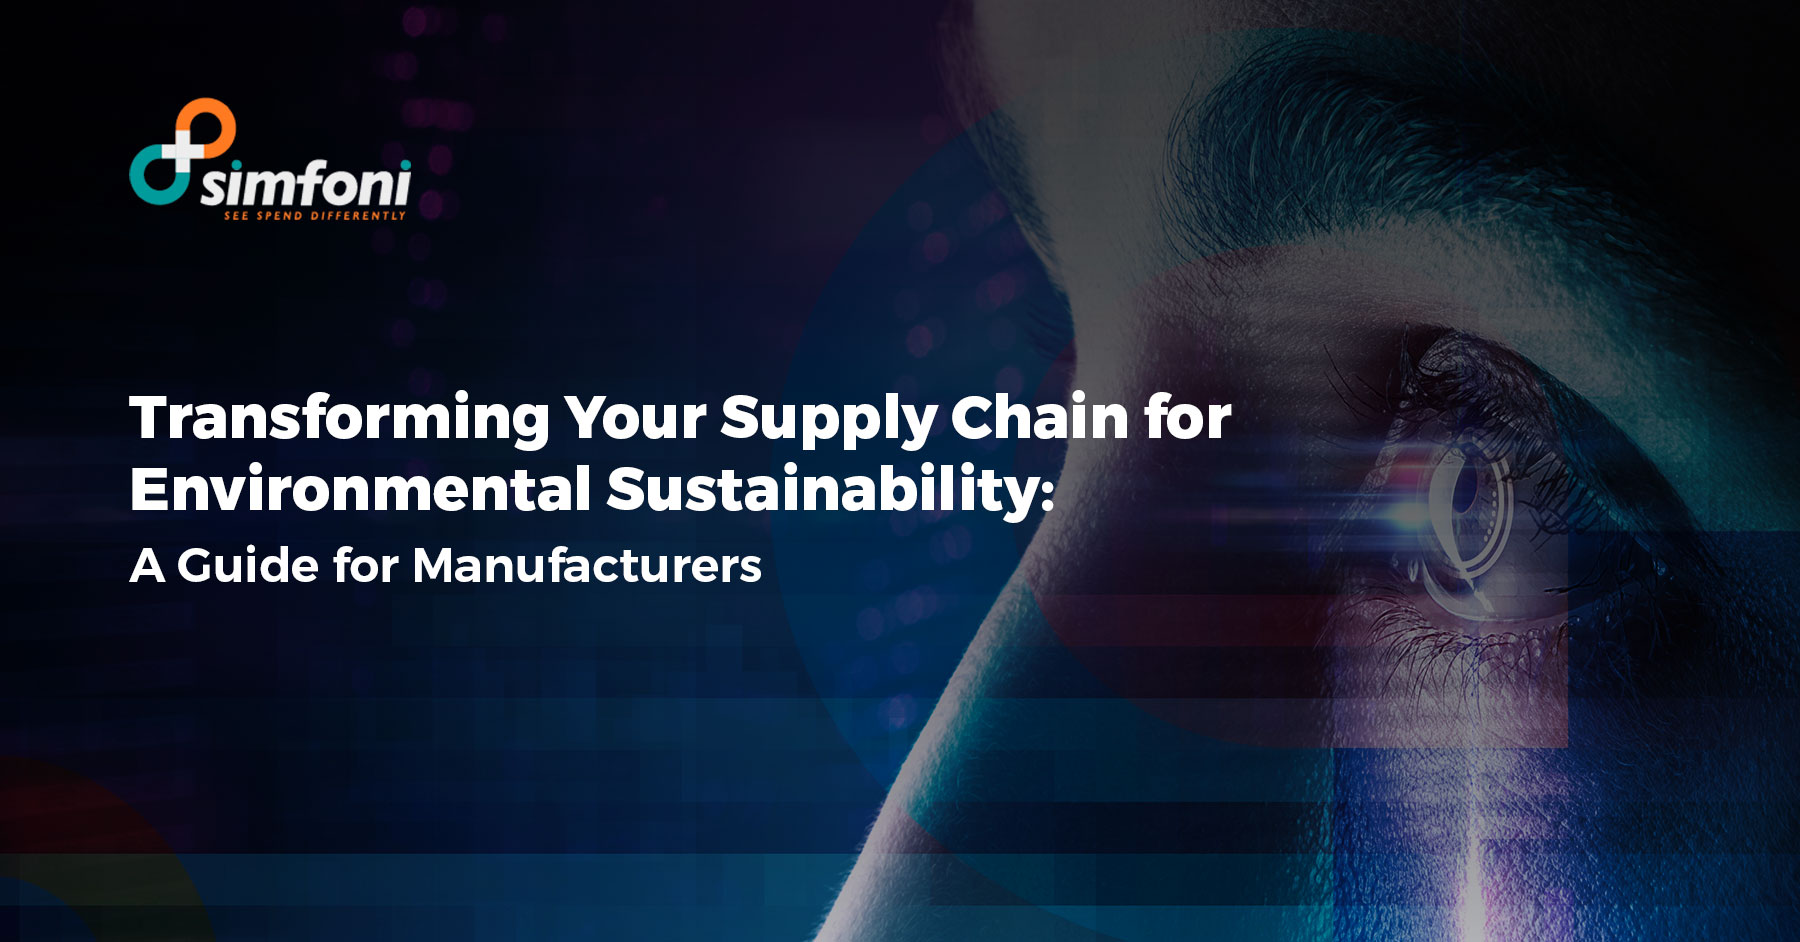 Sustainable supply chain transformation